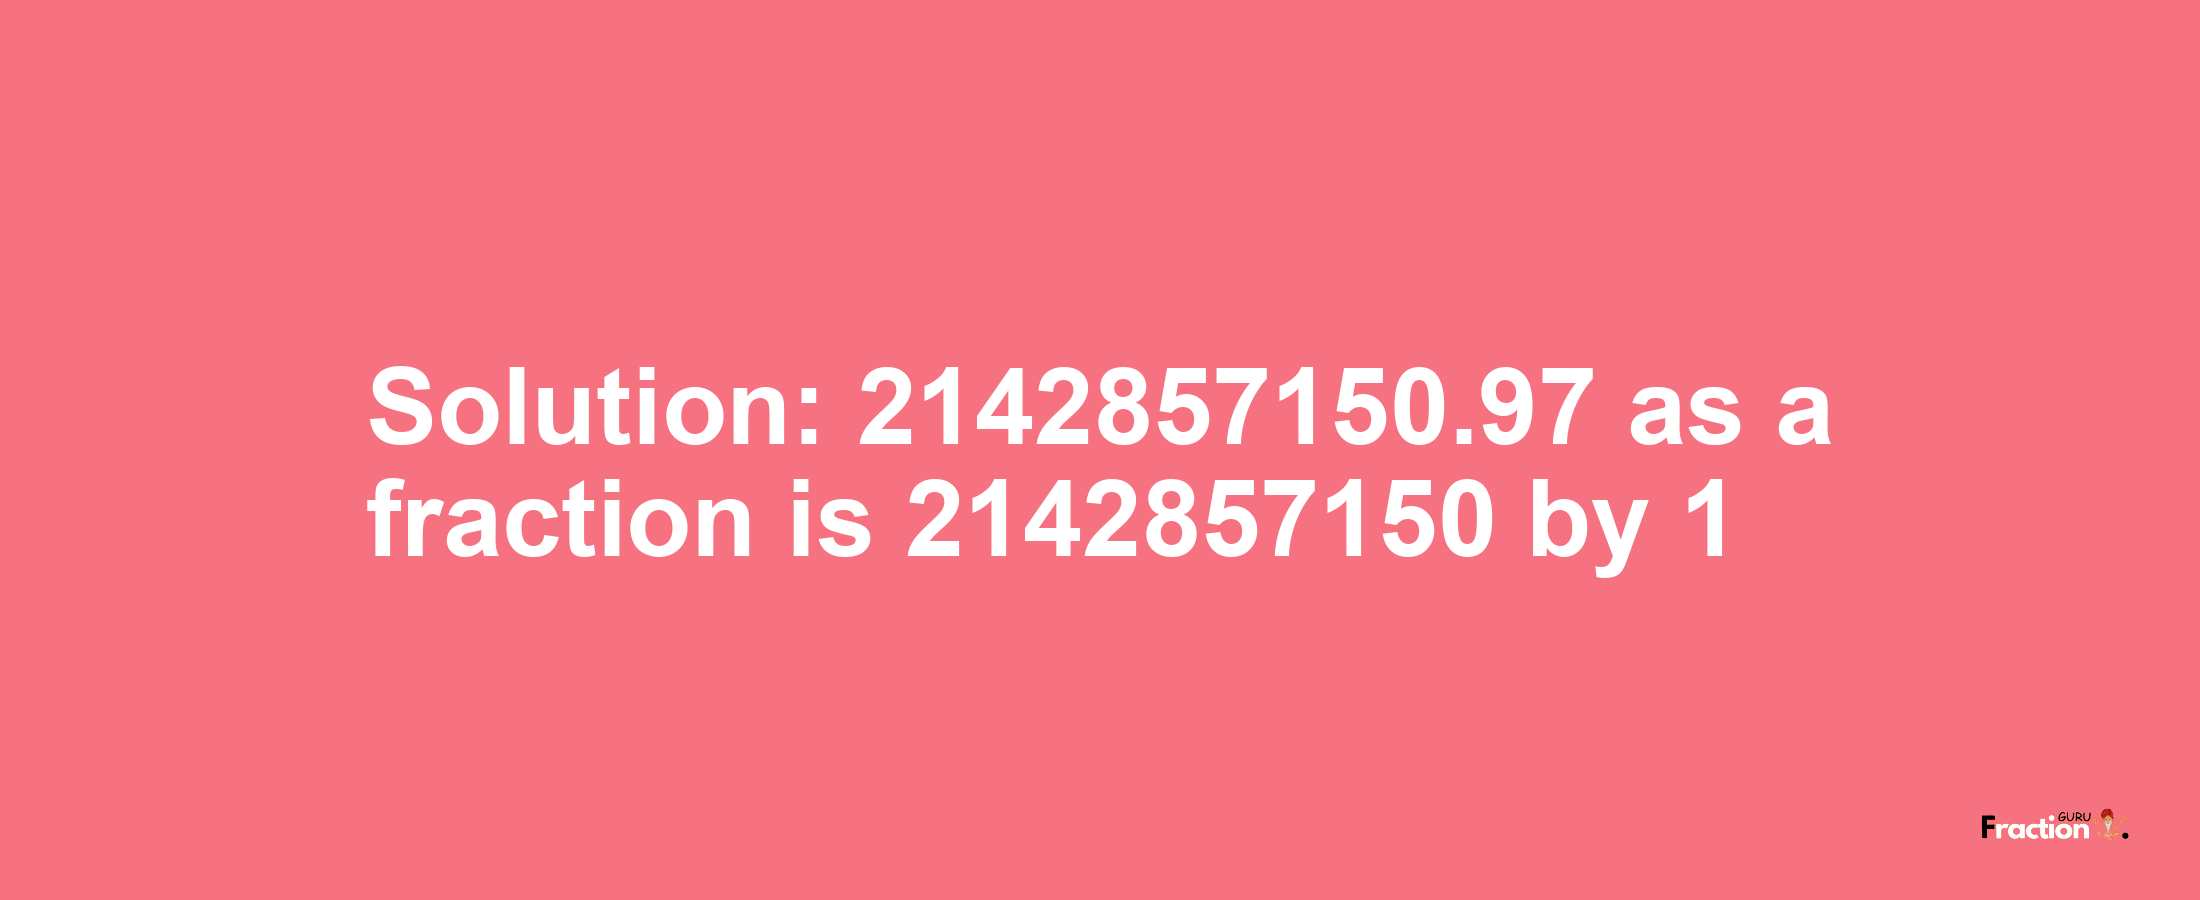 Solution:2142857150.97 as a fraction is 2142857150/1